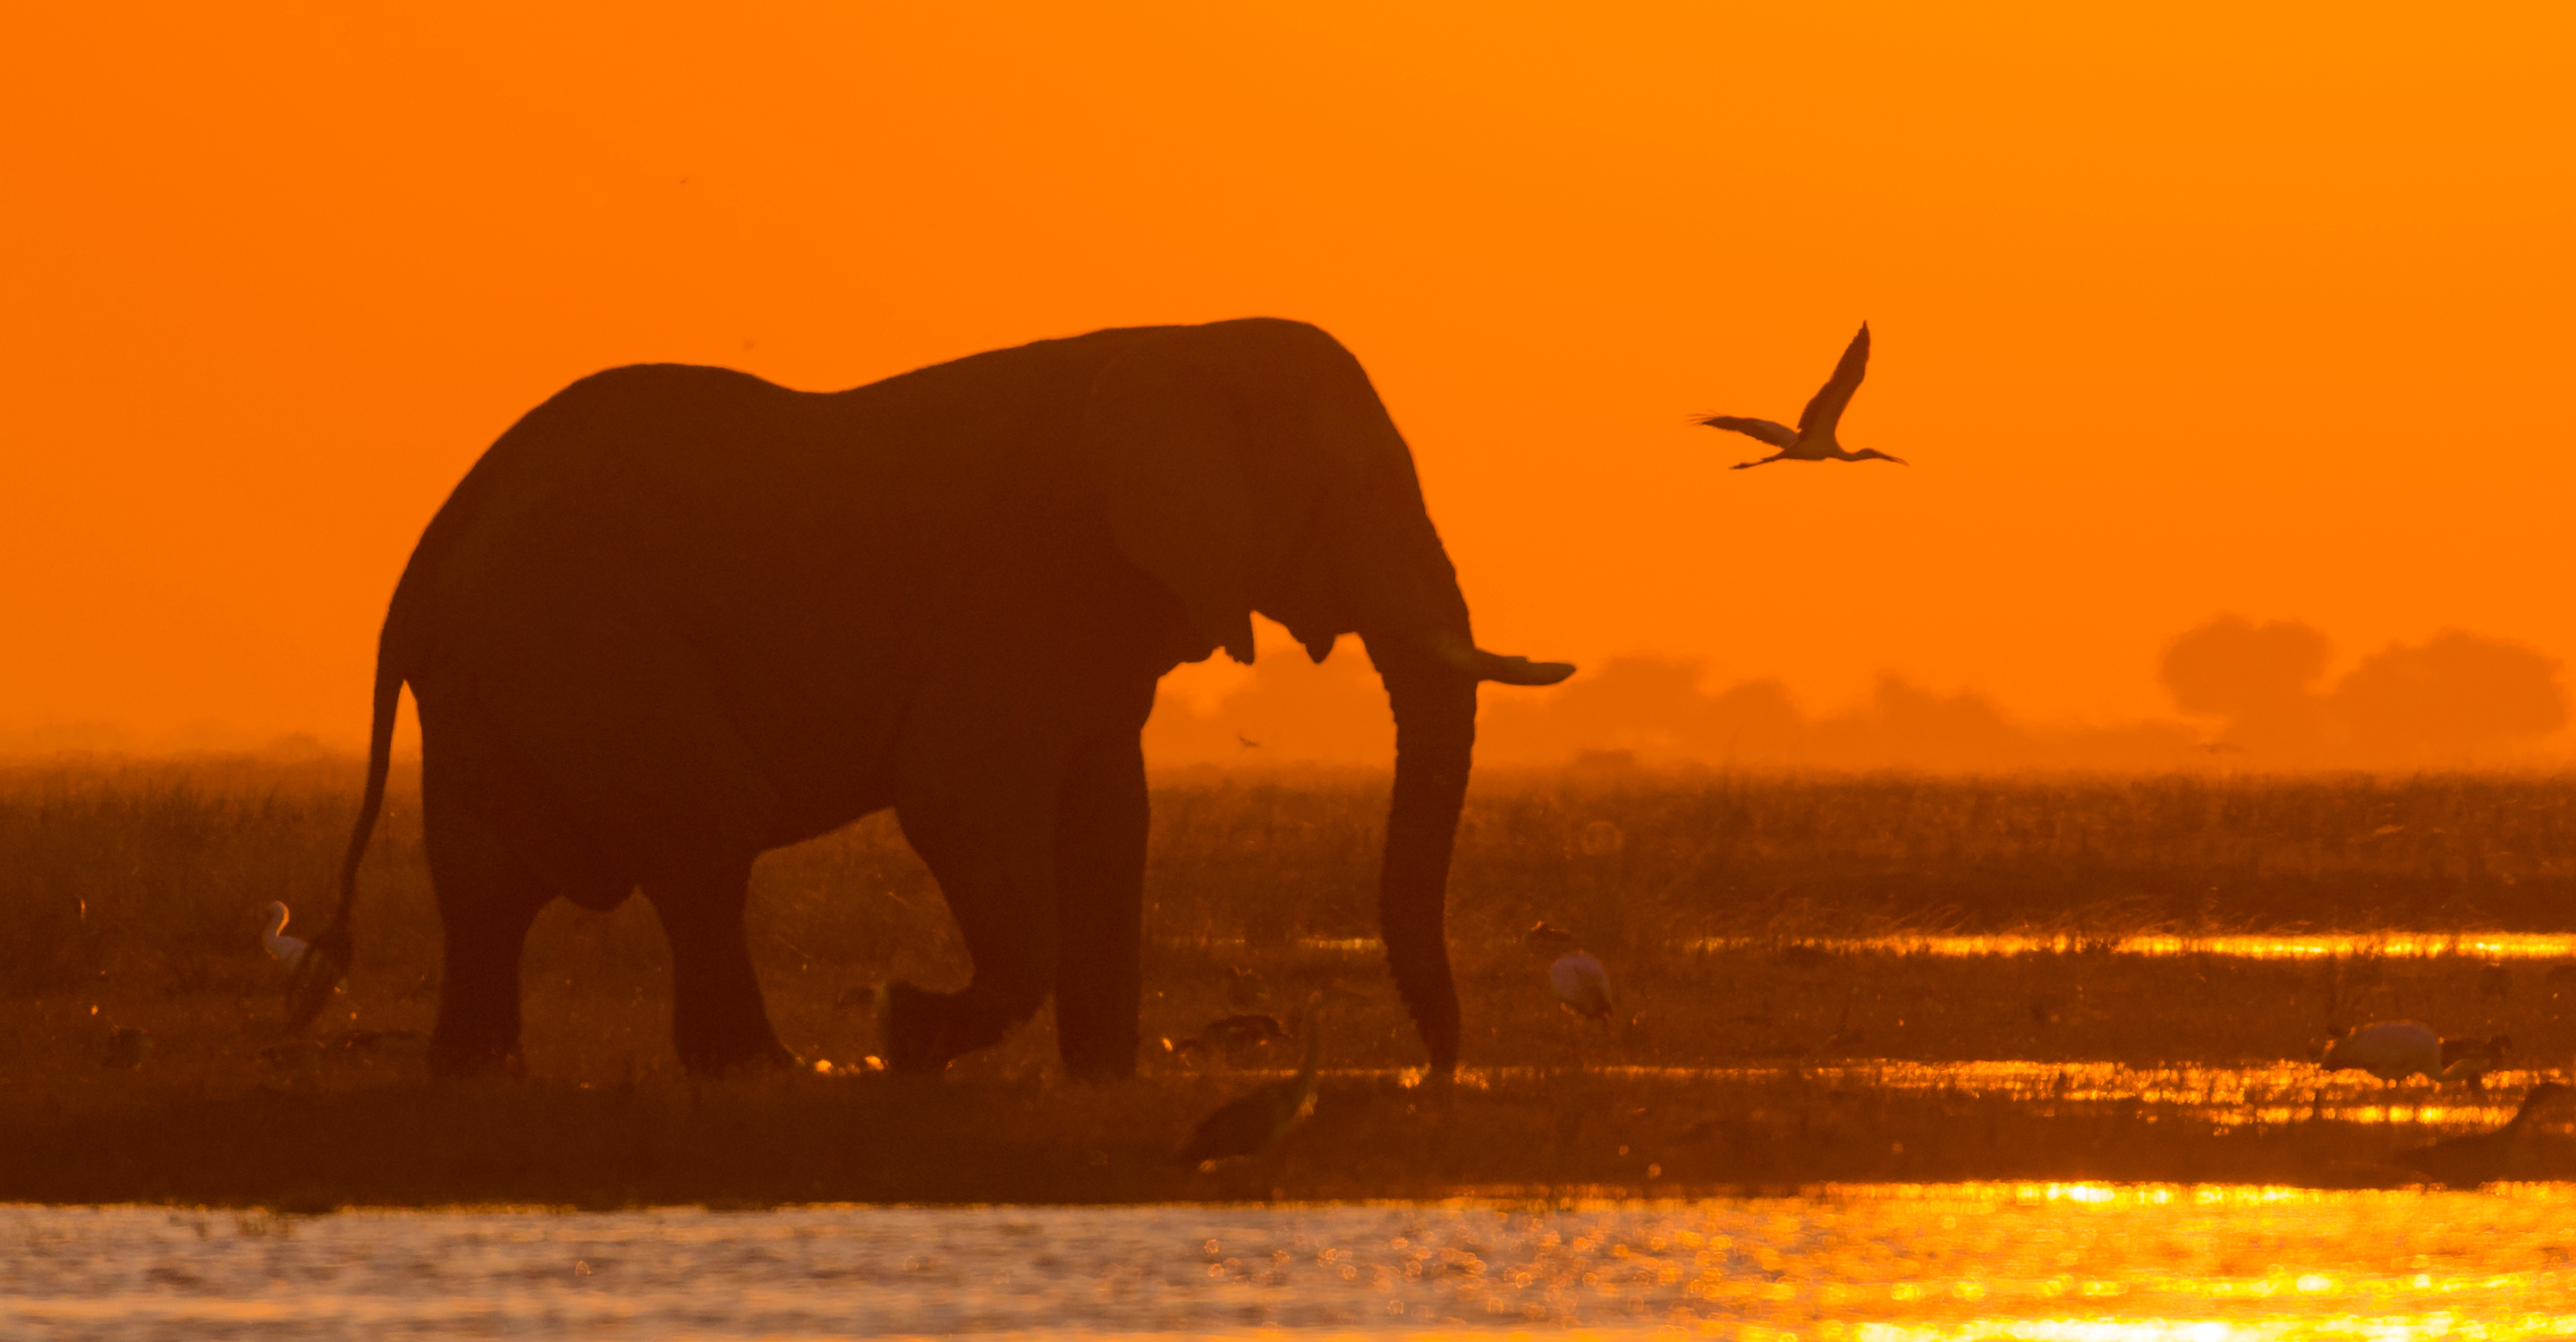 Sunset silhouette of an African elephant crossing the Chobe River, Chobe National Park, Botswana